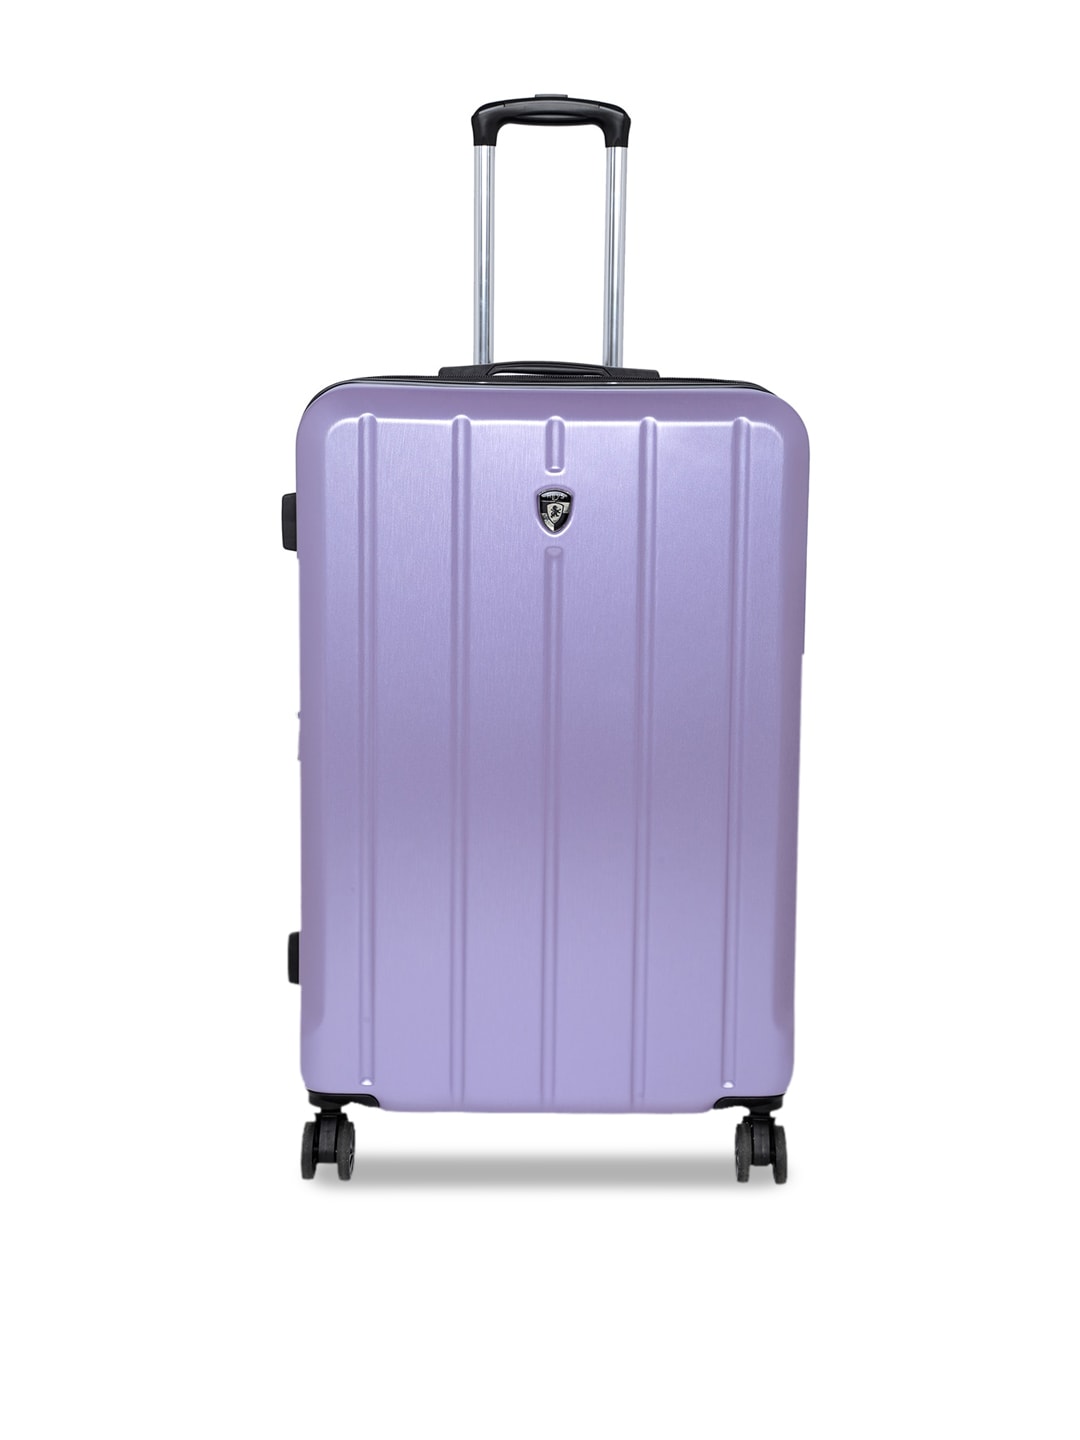 Heys Purple Textured Hard-Sided Large Trolley Suitcase Price in India